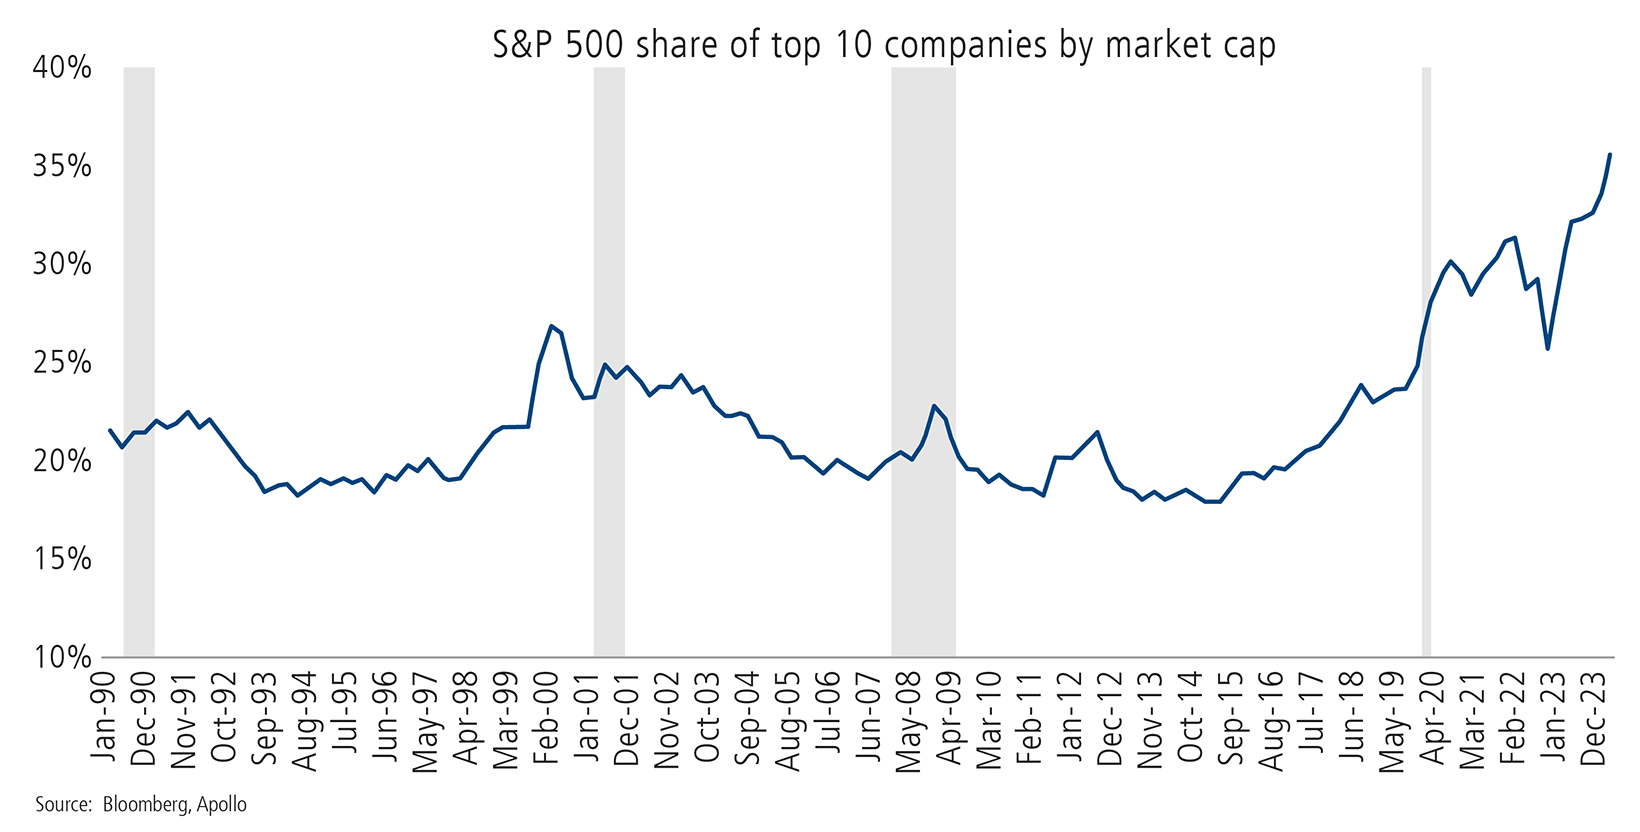 S&P 500 share of top 10 companies by market cap